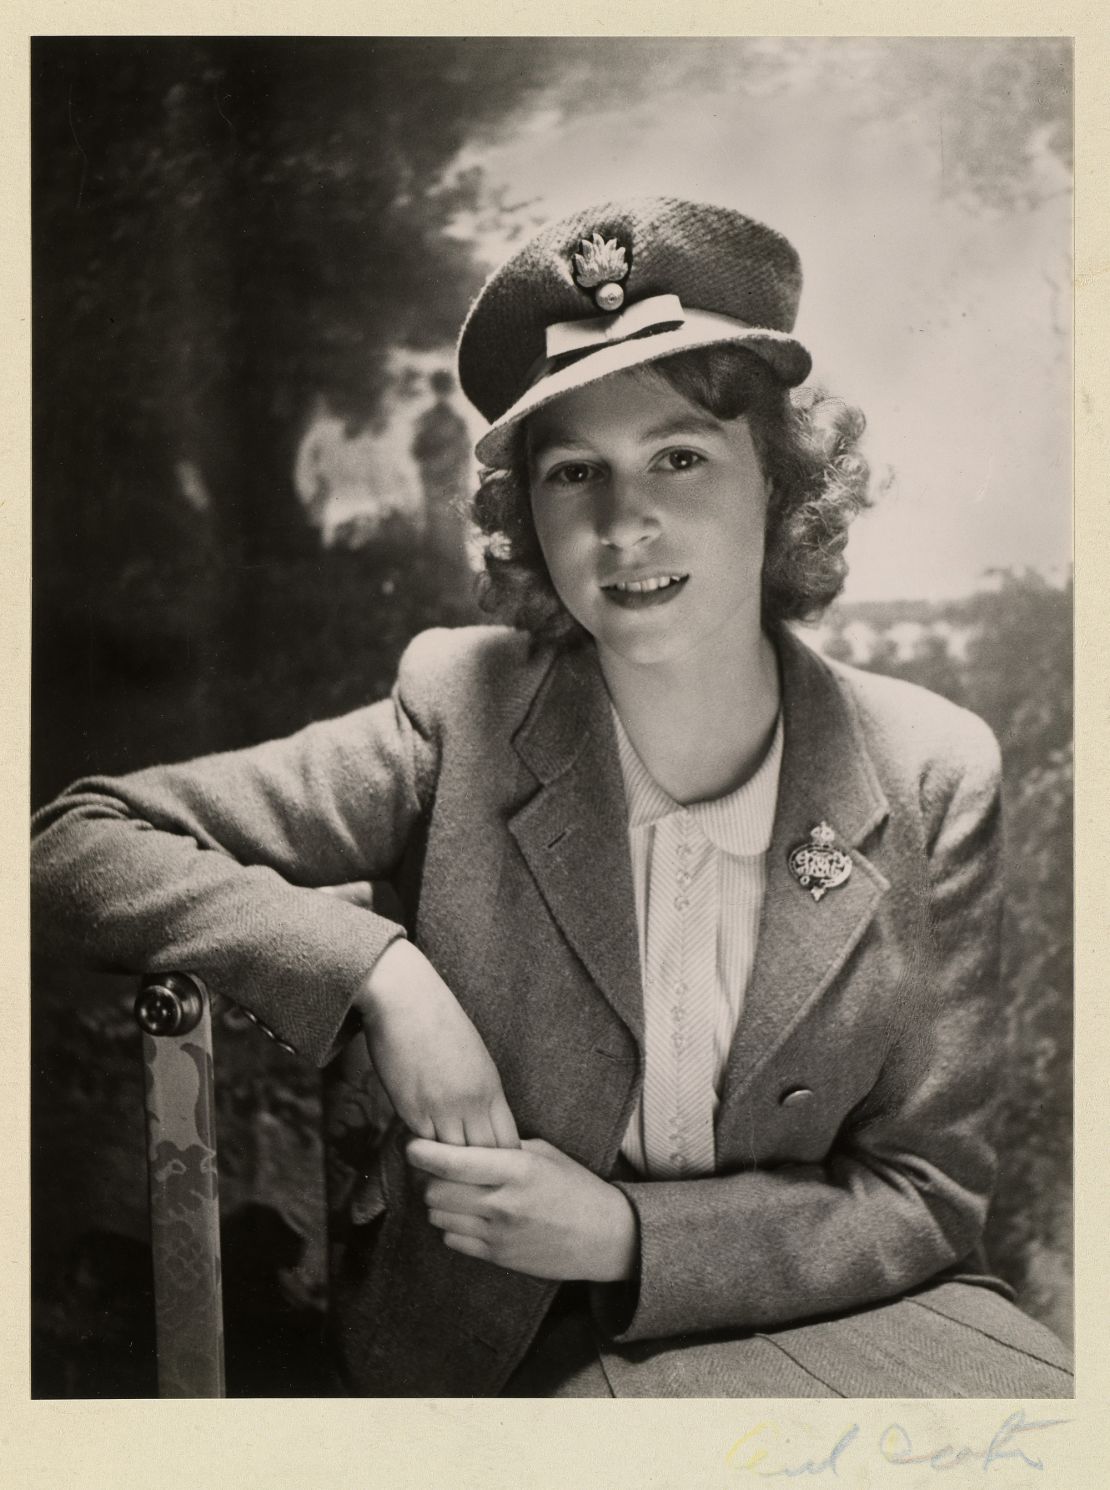 A wartime picture of the then Princess Elizabeth in 1942 forms part of the new exhibition.